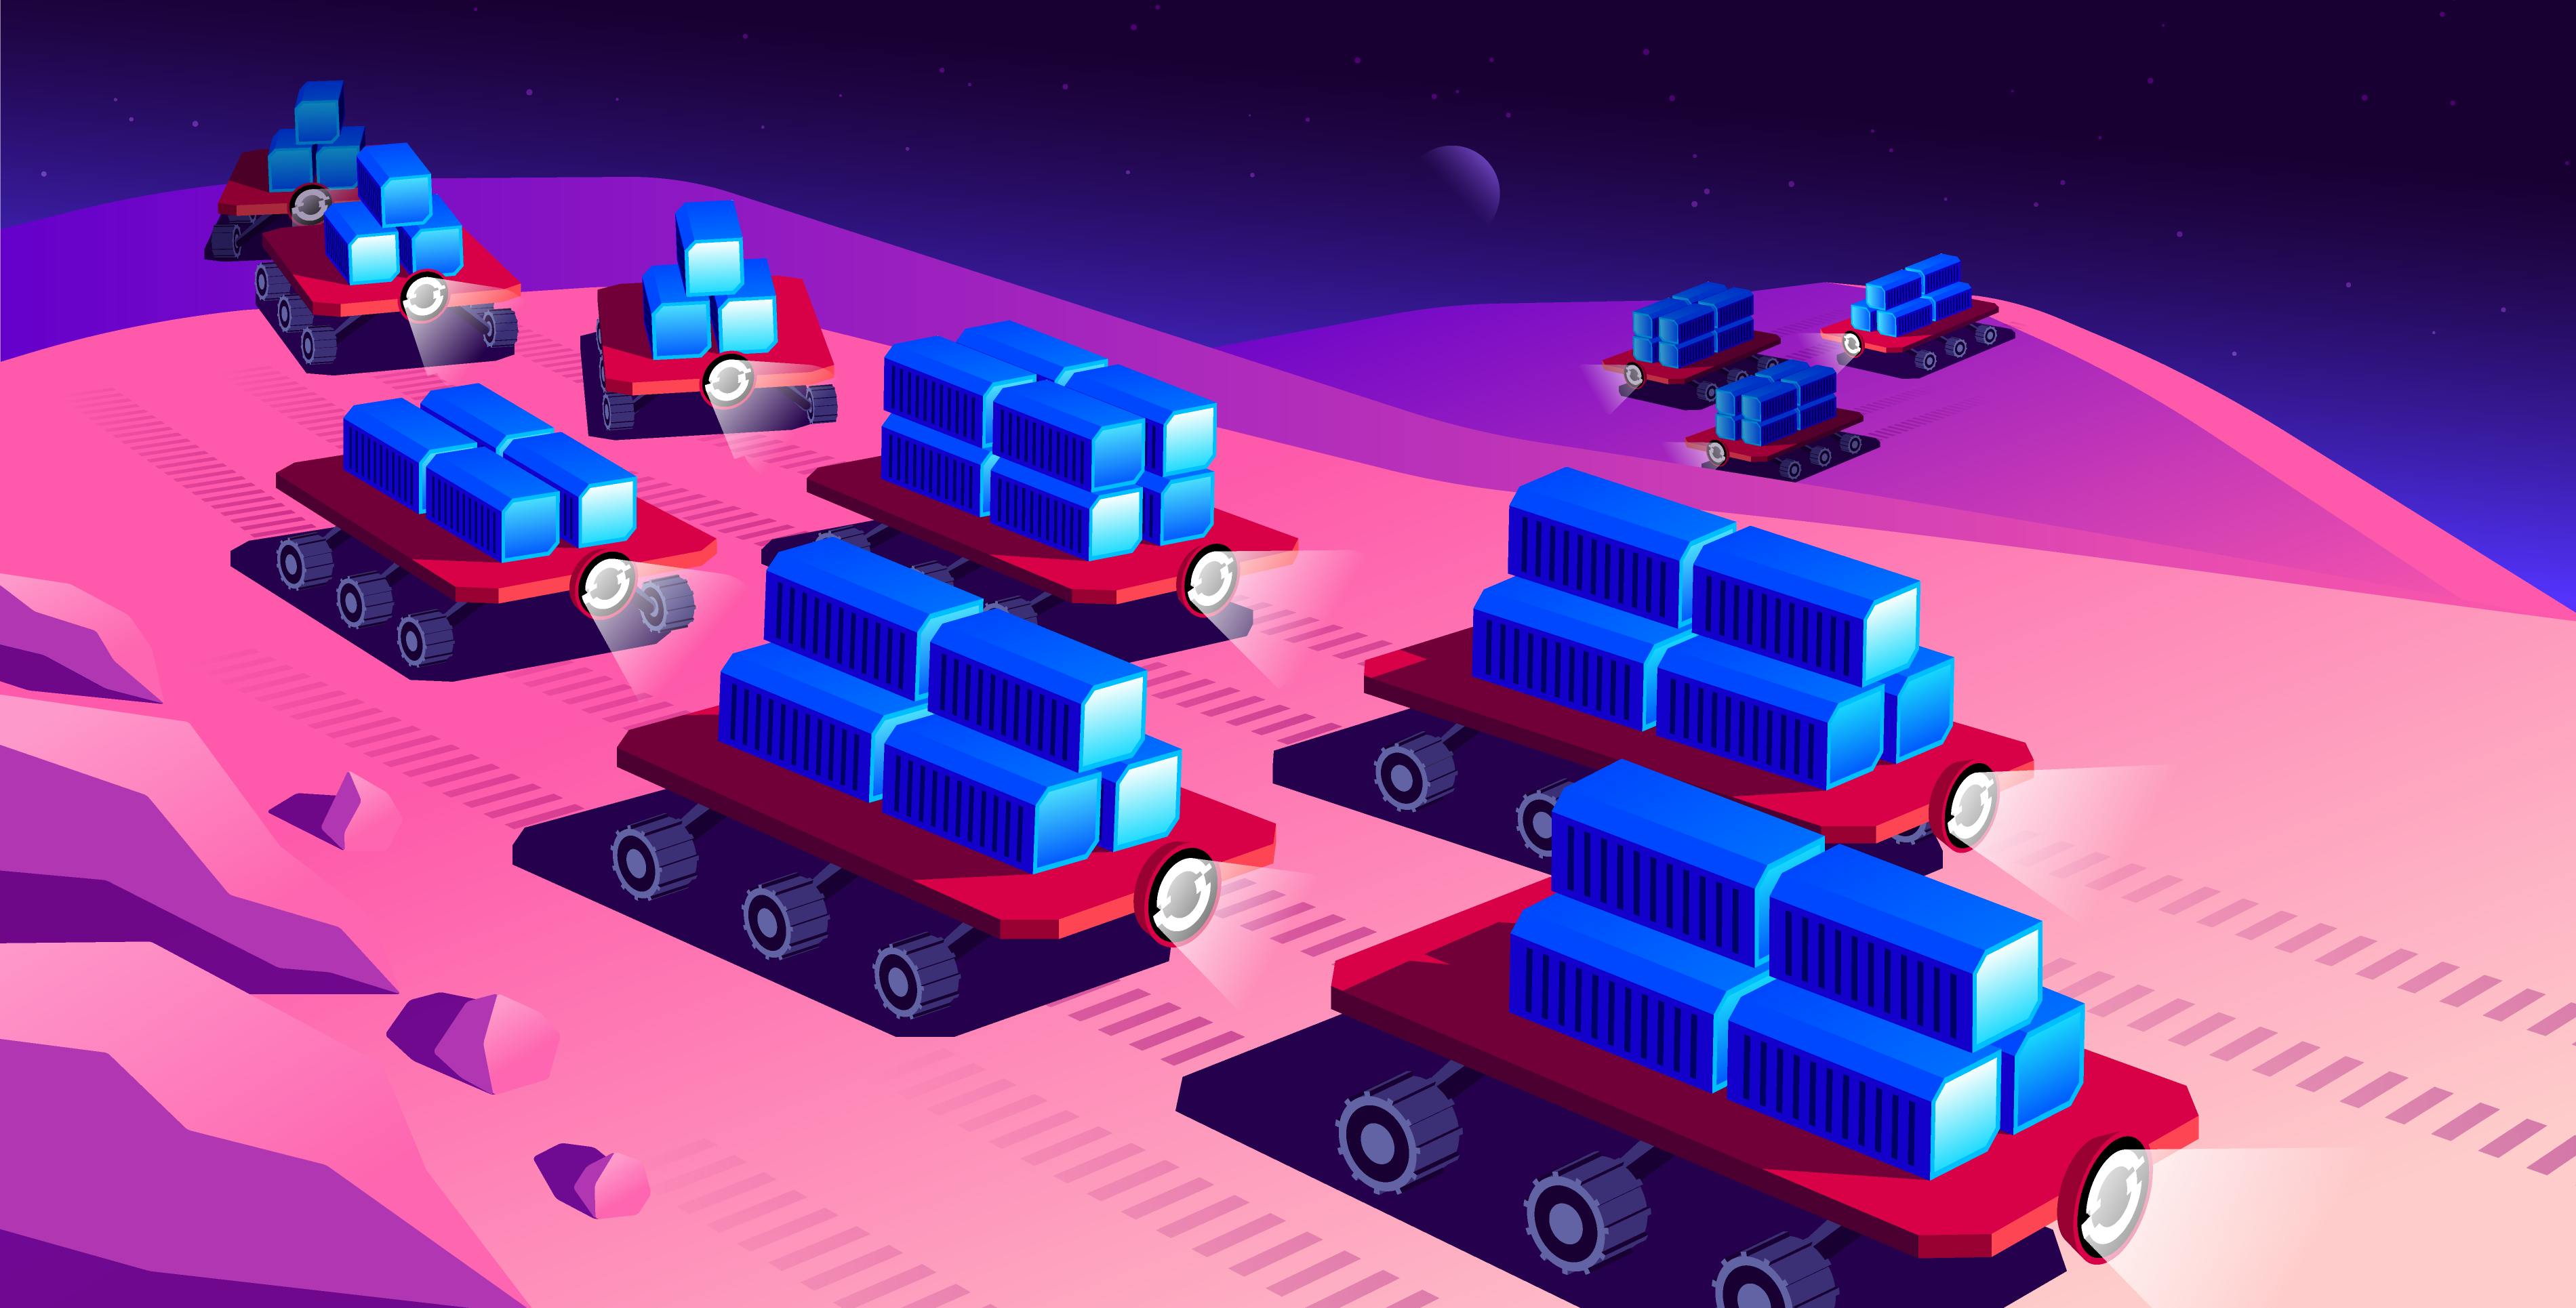 A colorful, digital rendering of space rover inspired vehicles(red) transporting shipping containers(blue) across a dark, celestial body(purple and pink).